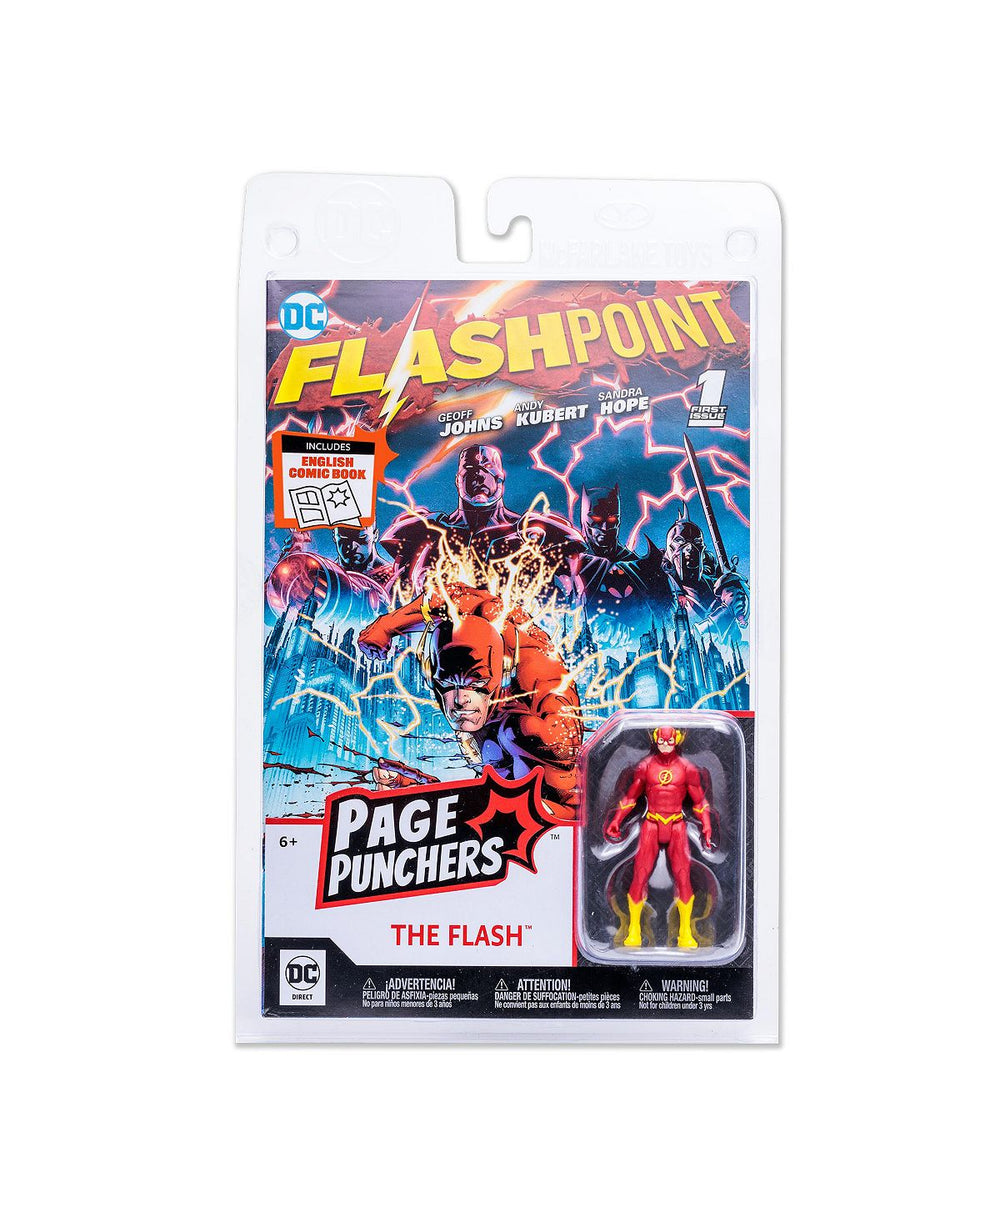 McFarlane Toys DC Flashpoint 7" Action Figure - The Flash with Comic Page Punchers